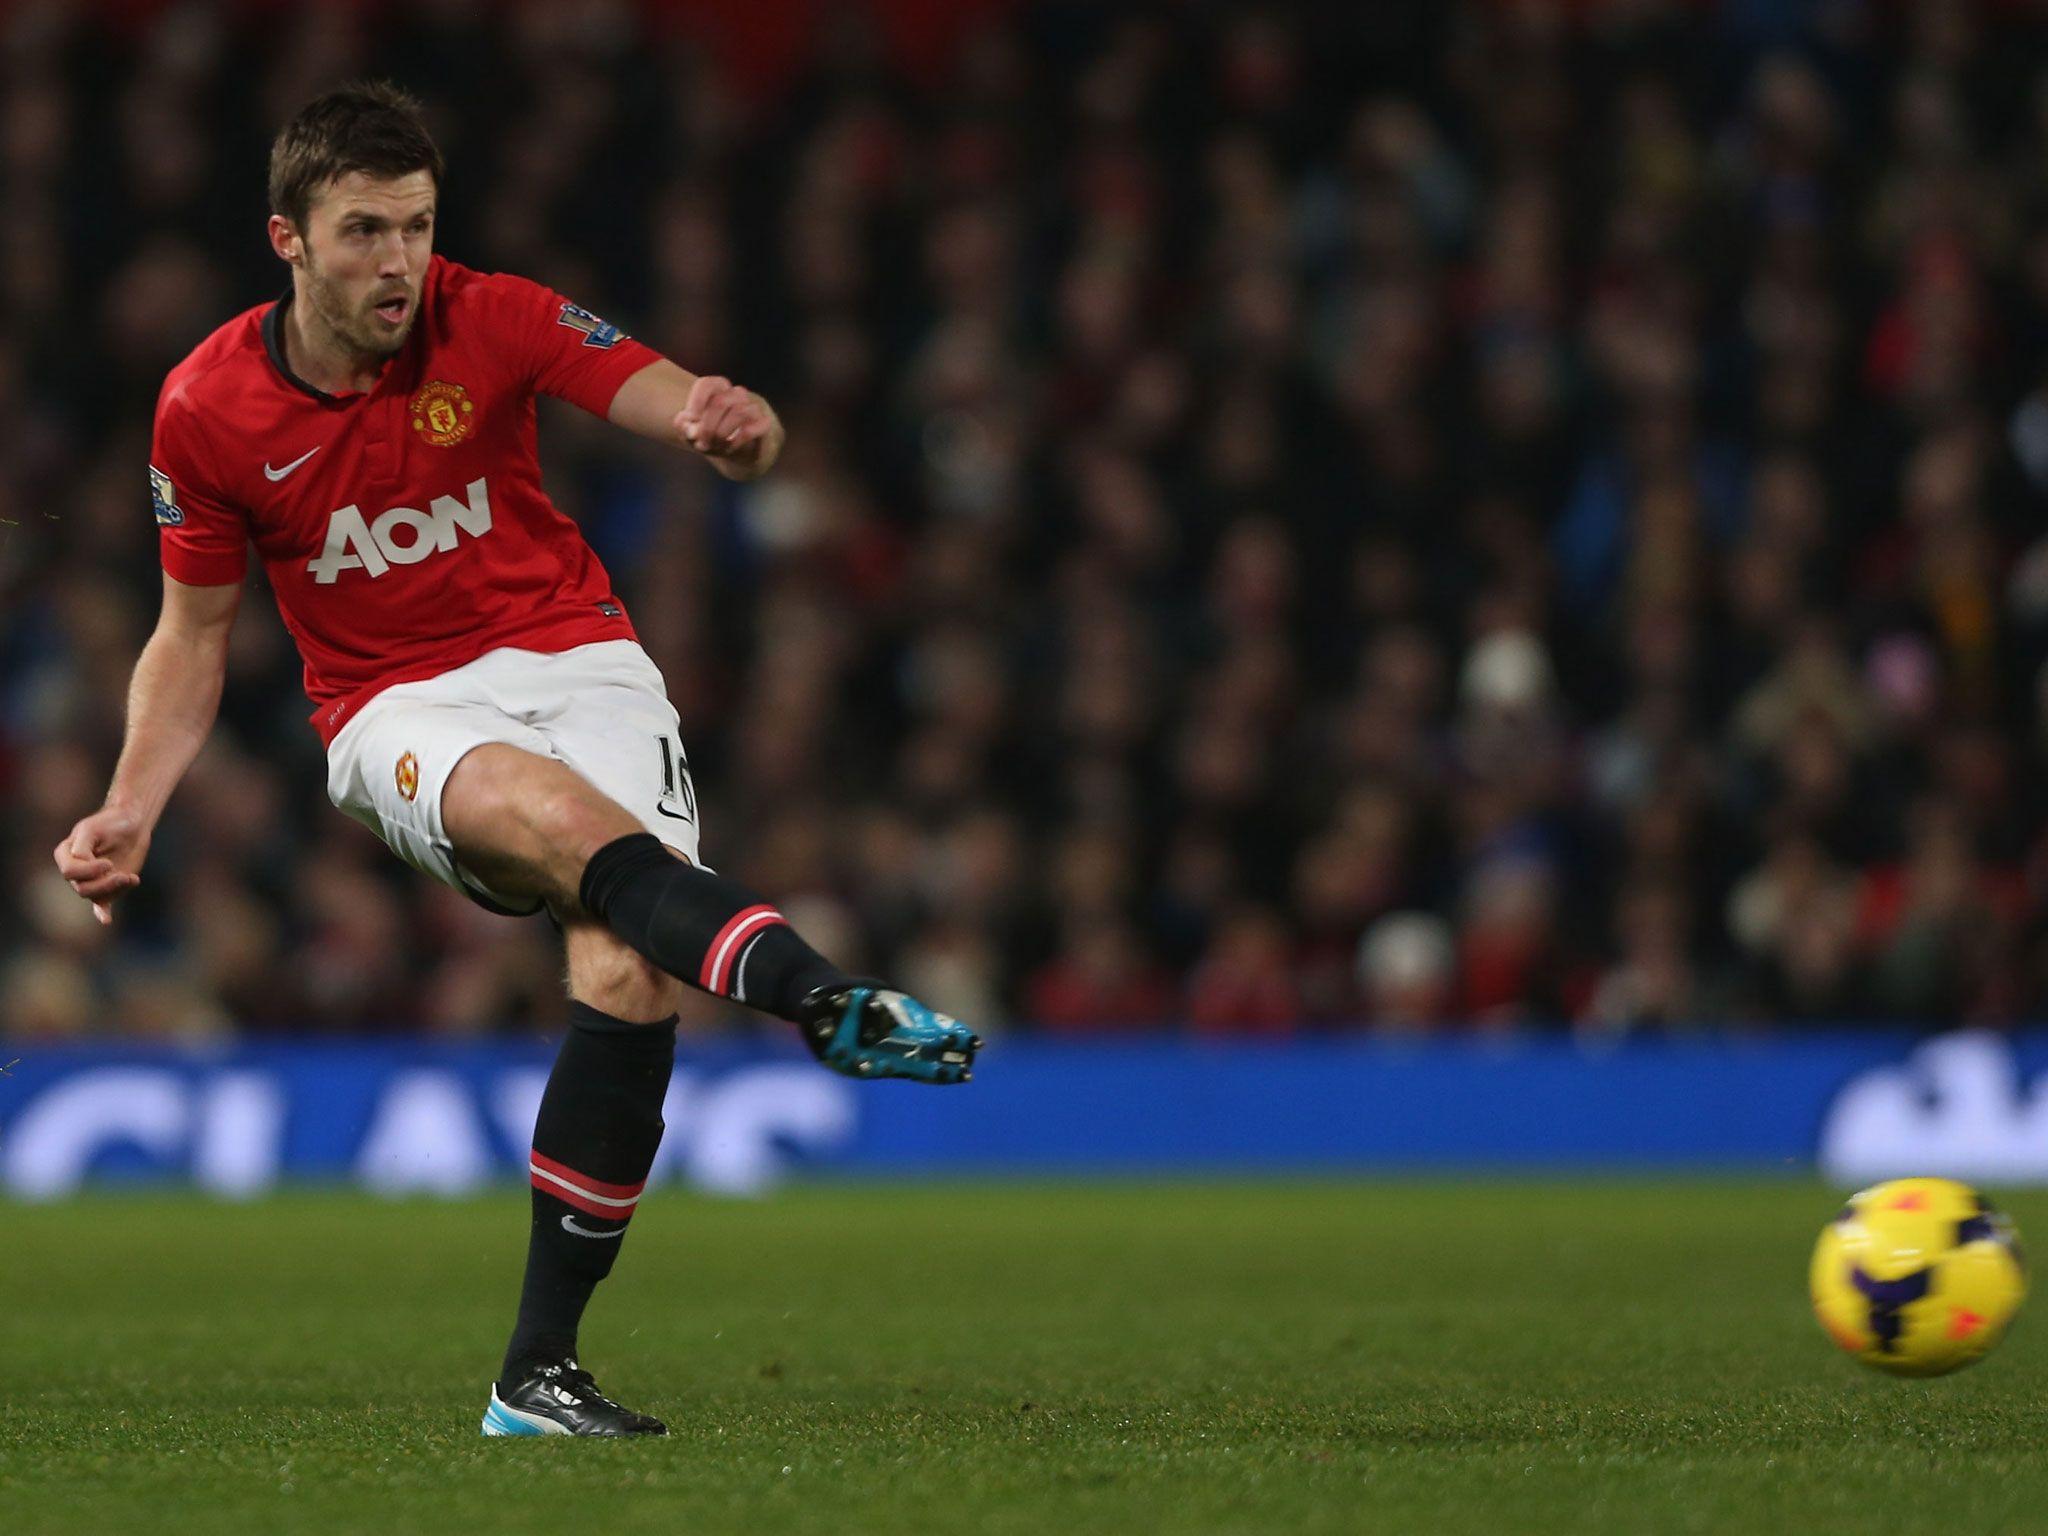 Michael Carrick injury: Manchester United midfielder could be out